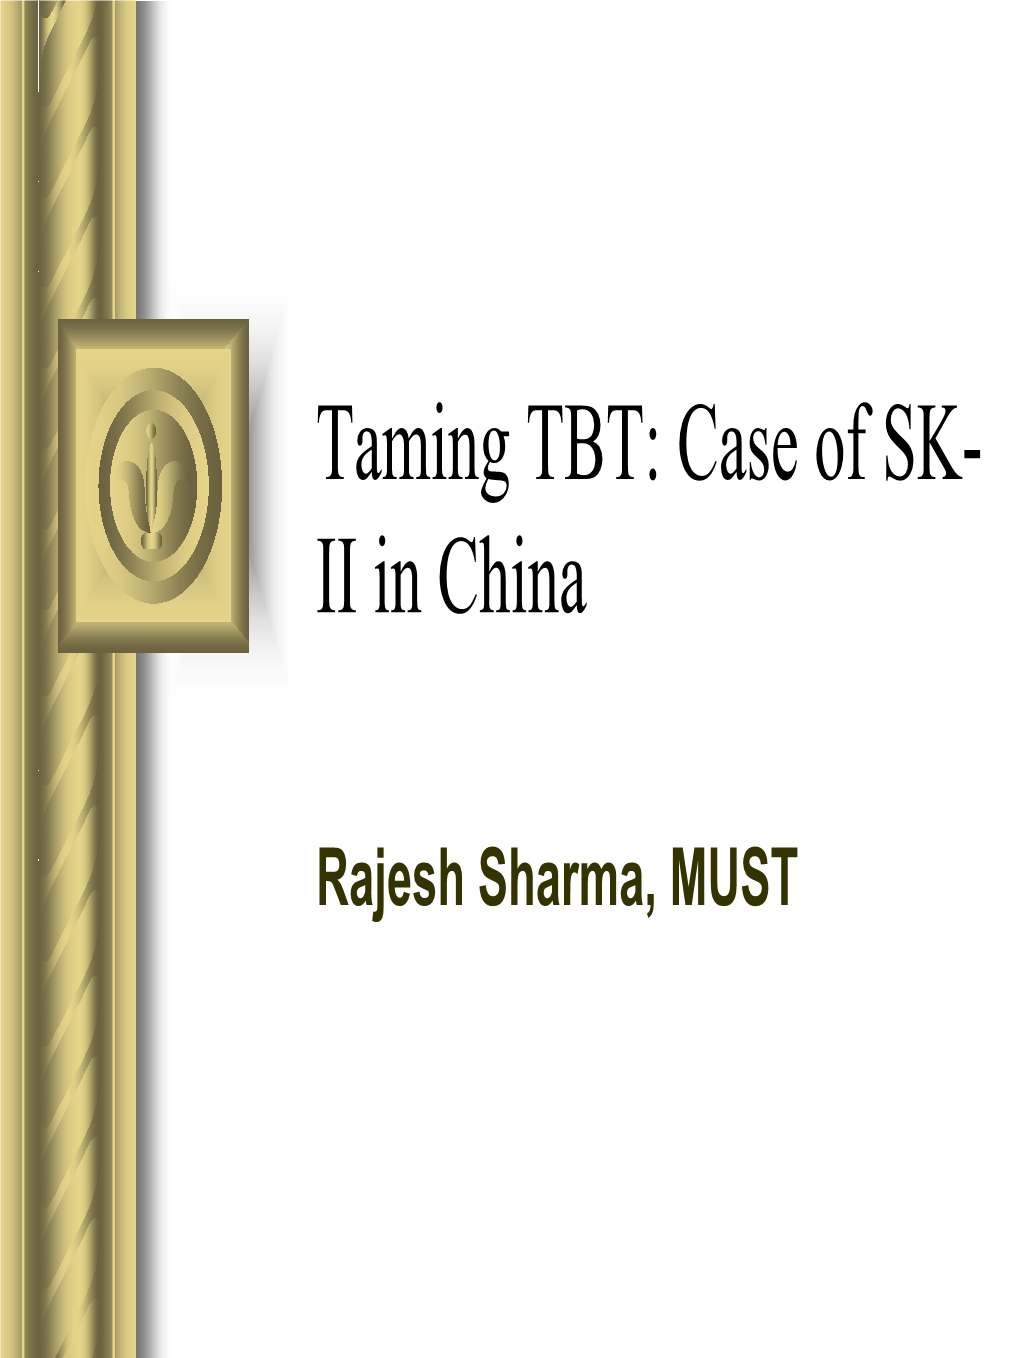 Taming TBT: Case of SK-II in China